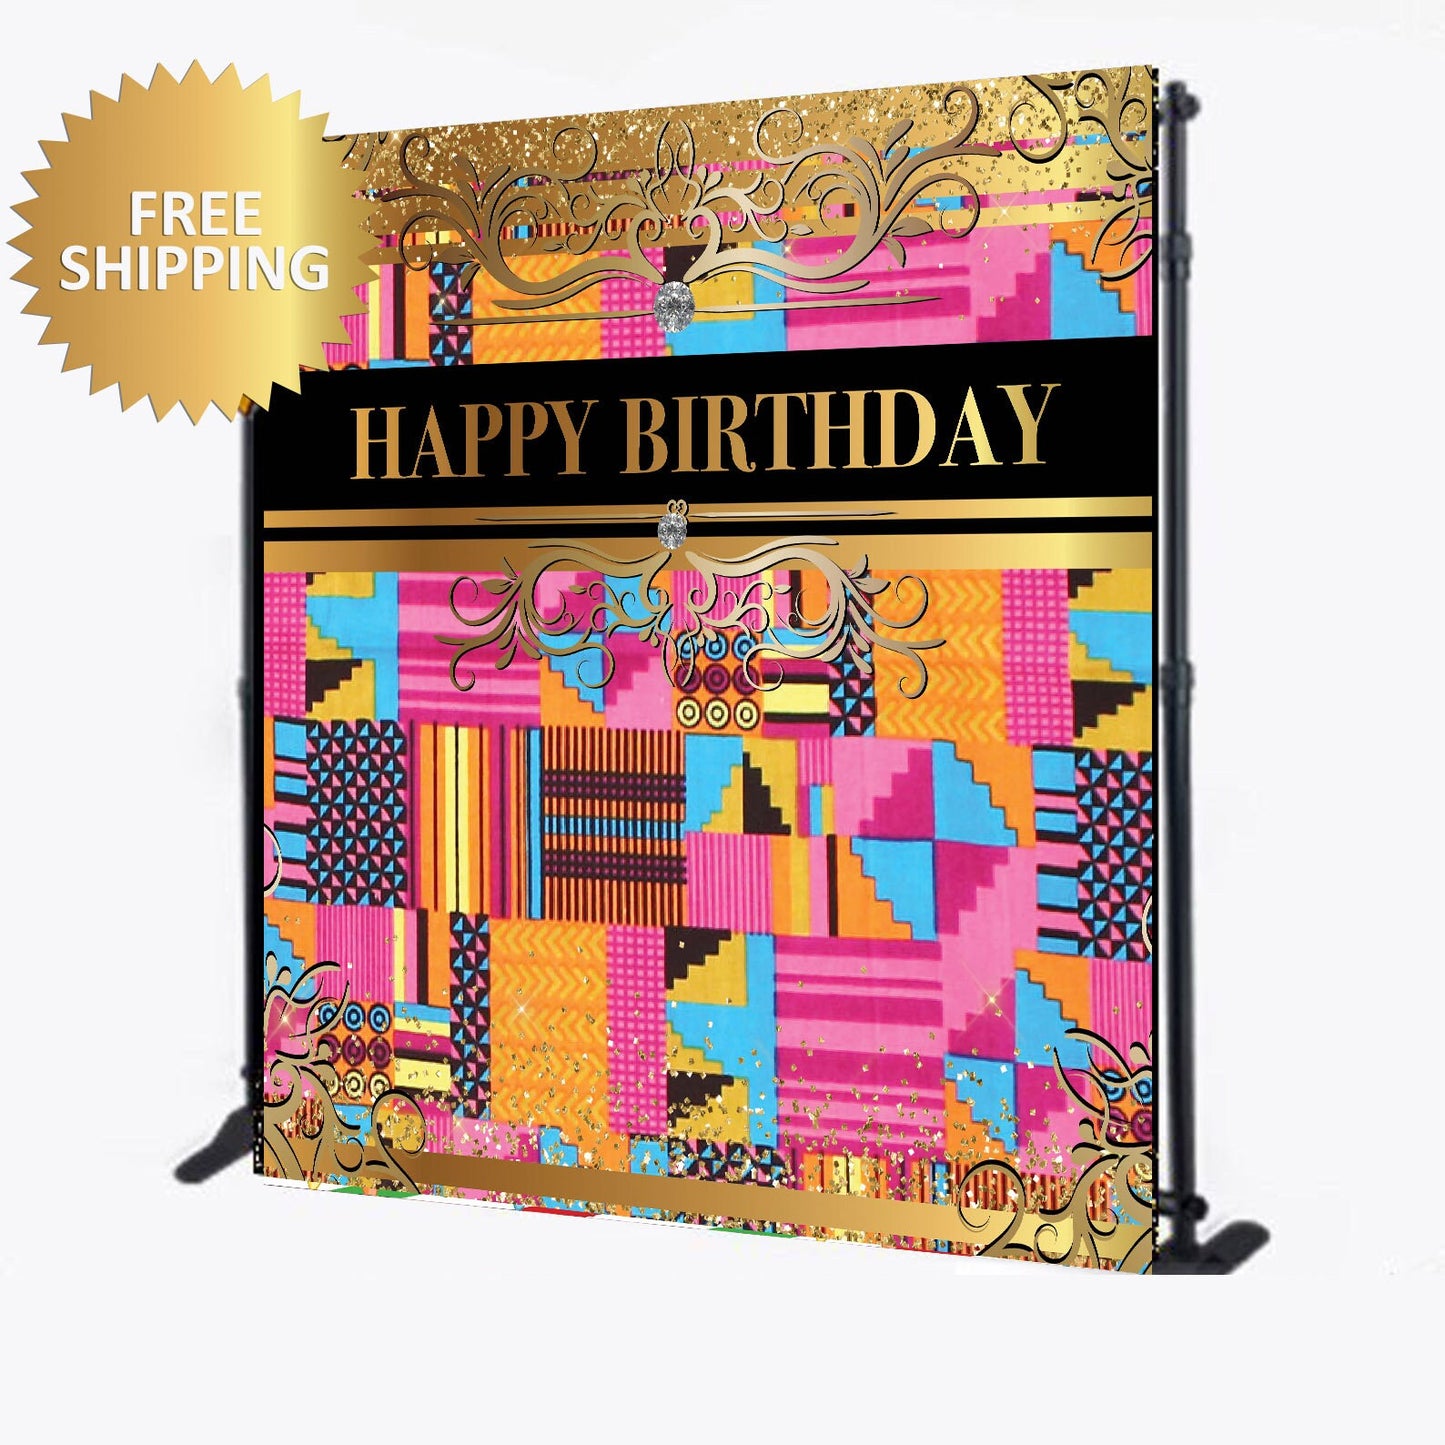 African 8X8 Photo Booth backdrop, African Step and Repeat, Ethnic Step and repeat, Step repeat backdrop, Birthday backdrop,Birthday banner